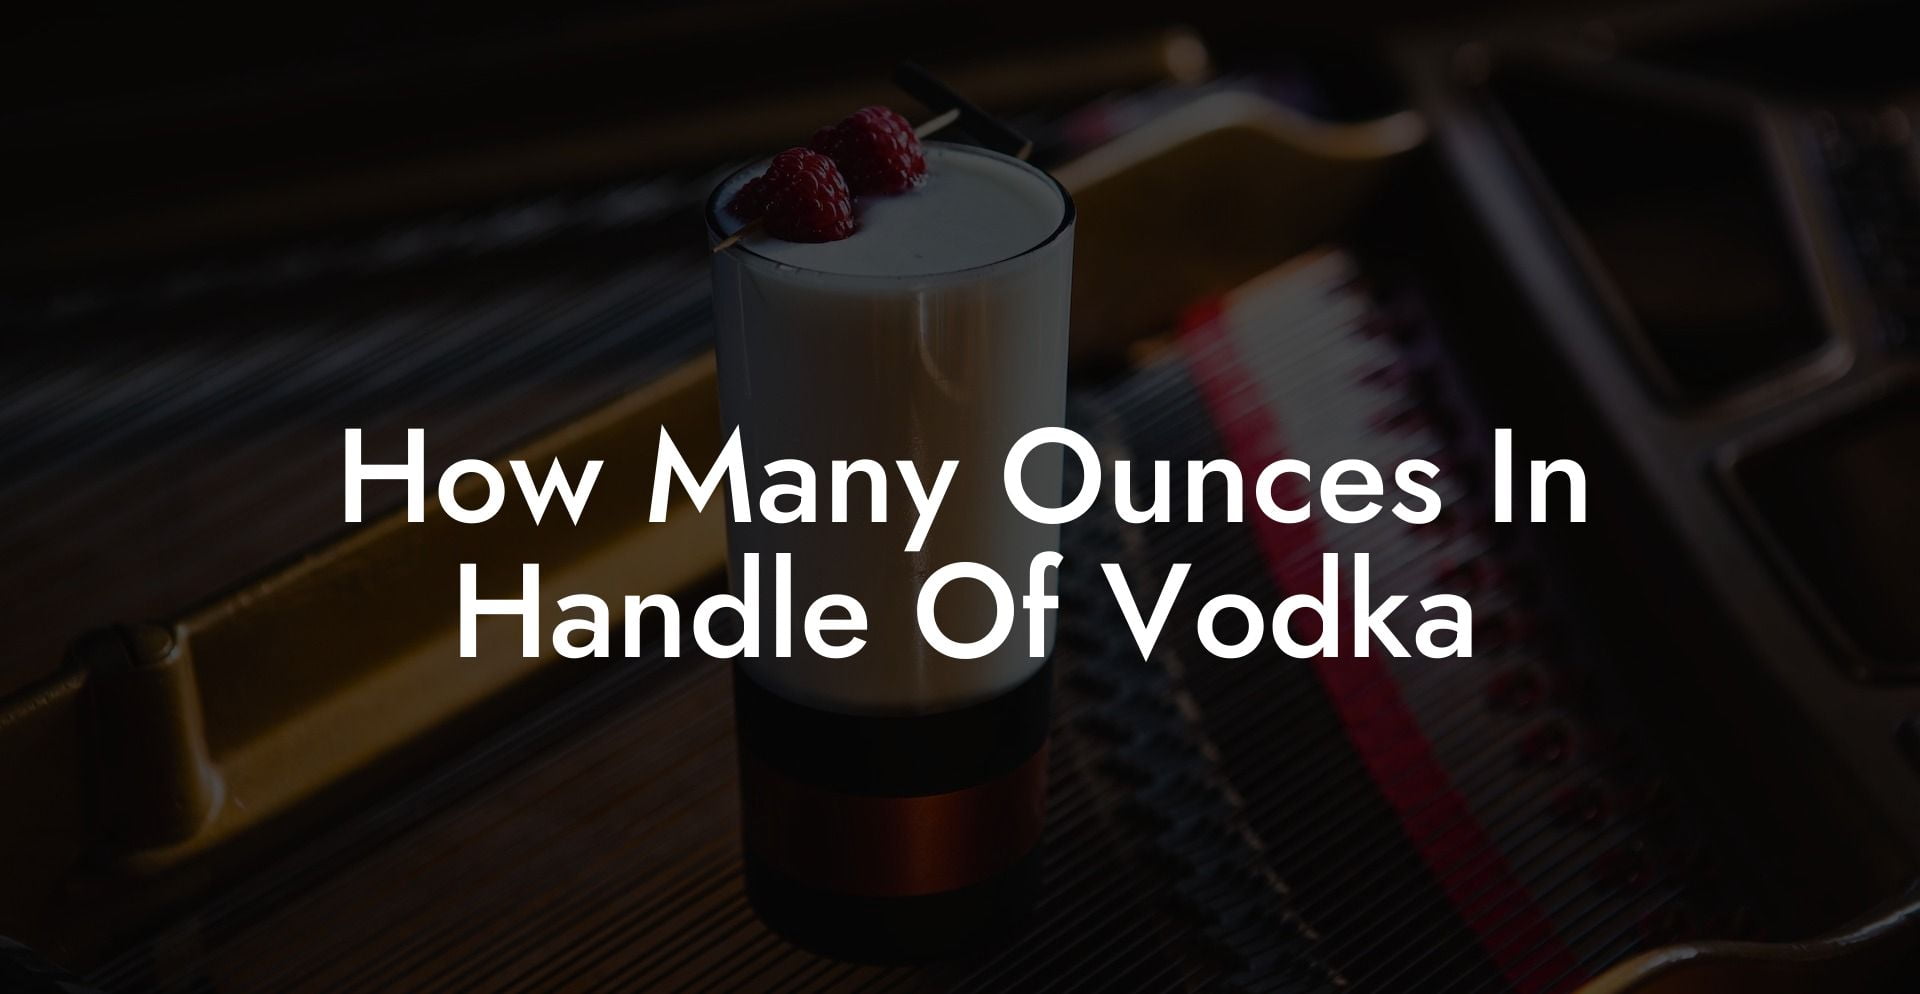 How Many Ounces In Handle Of Vodka